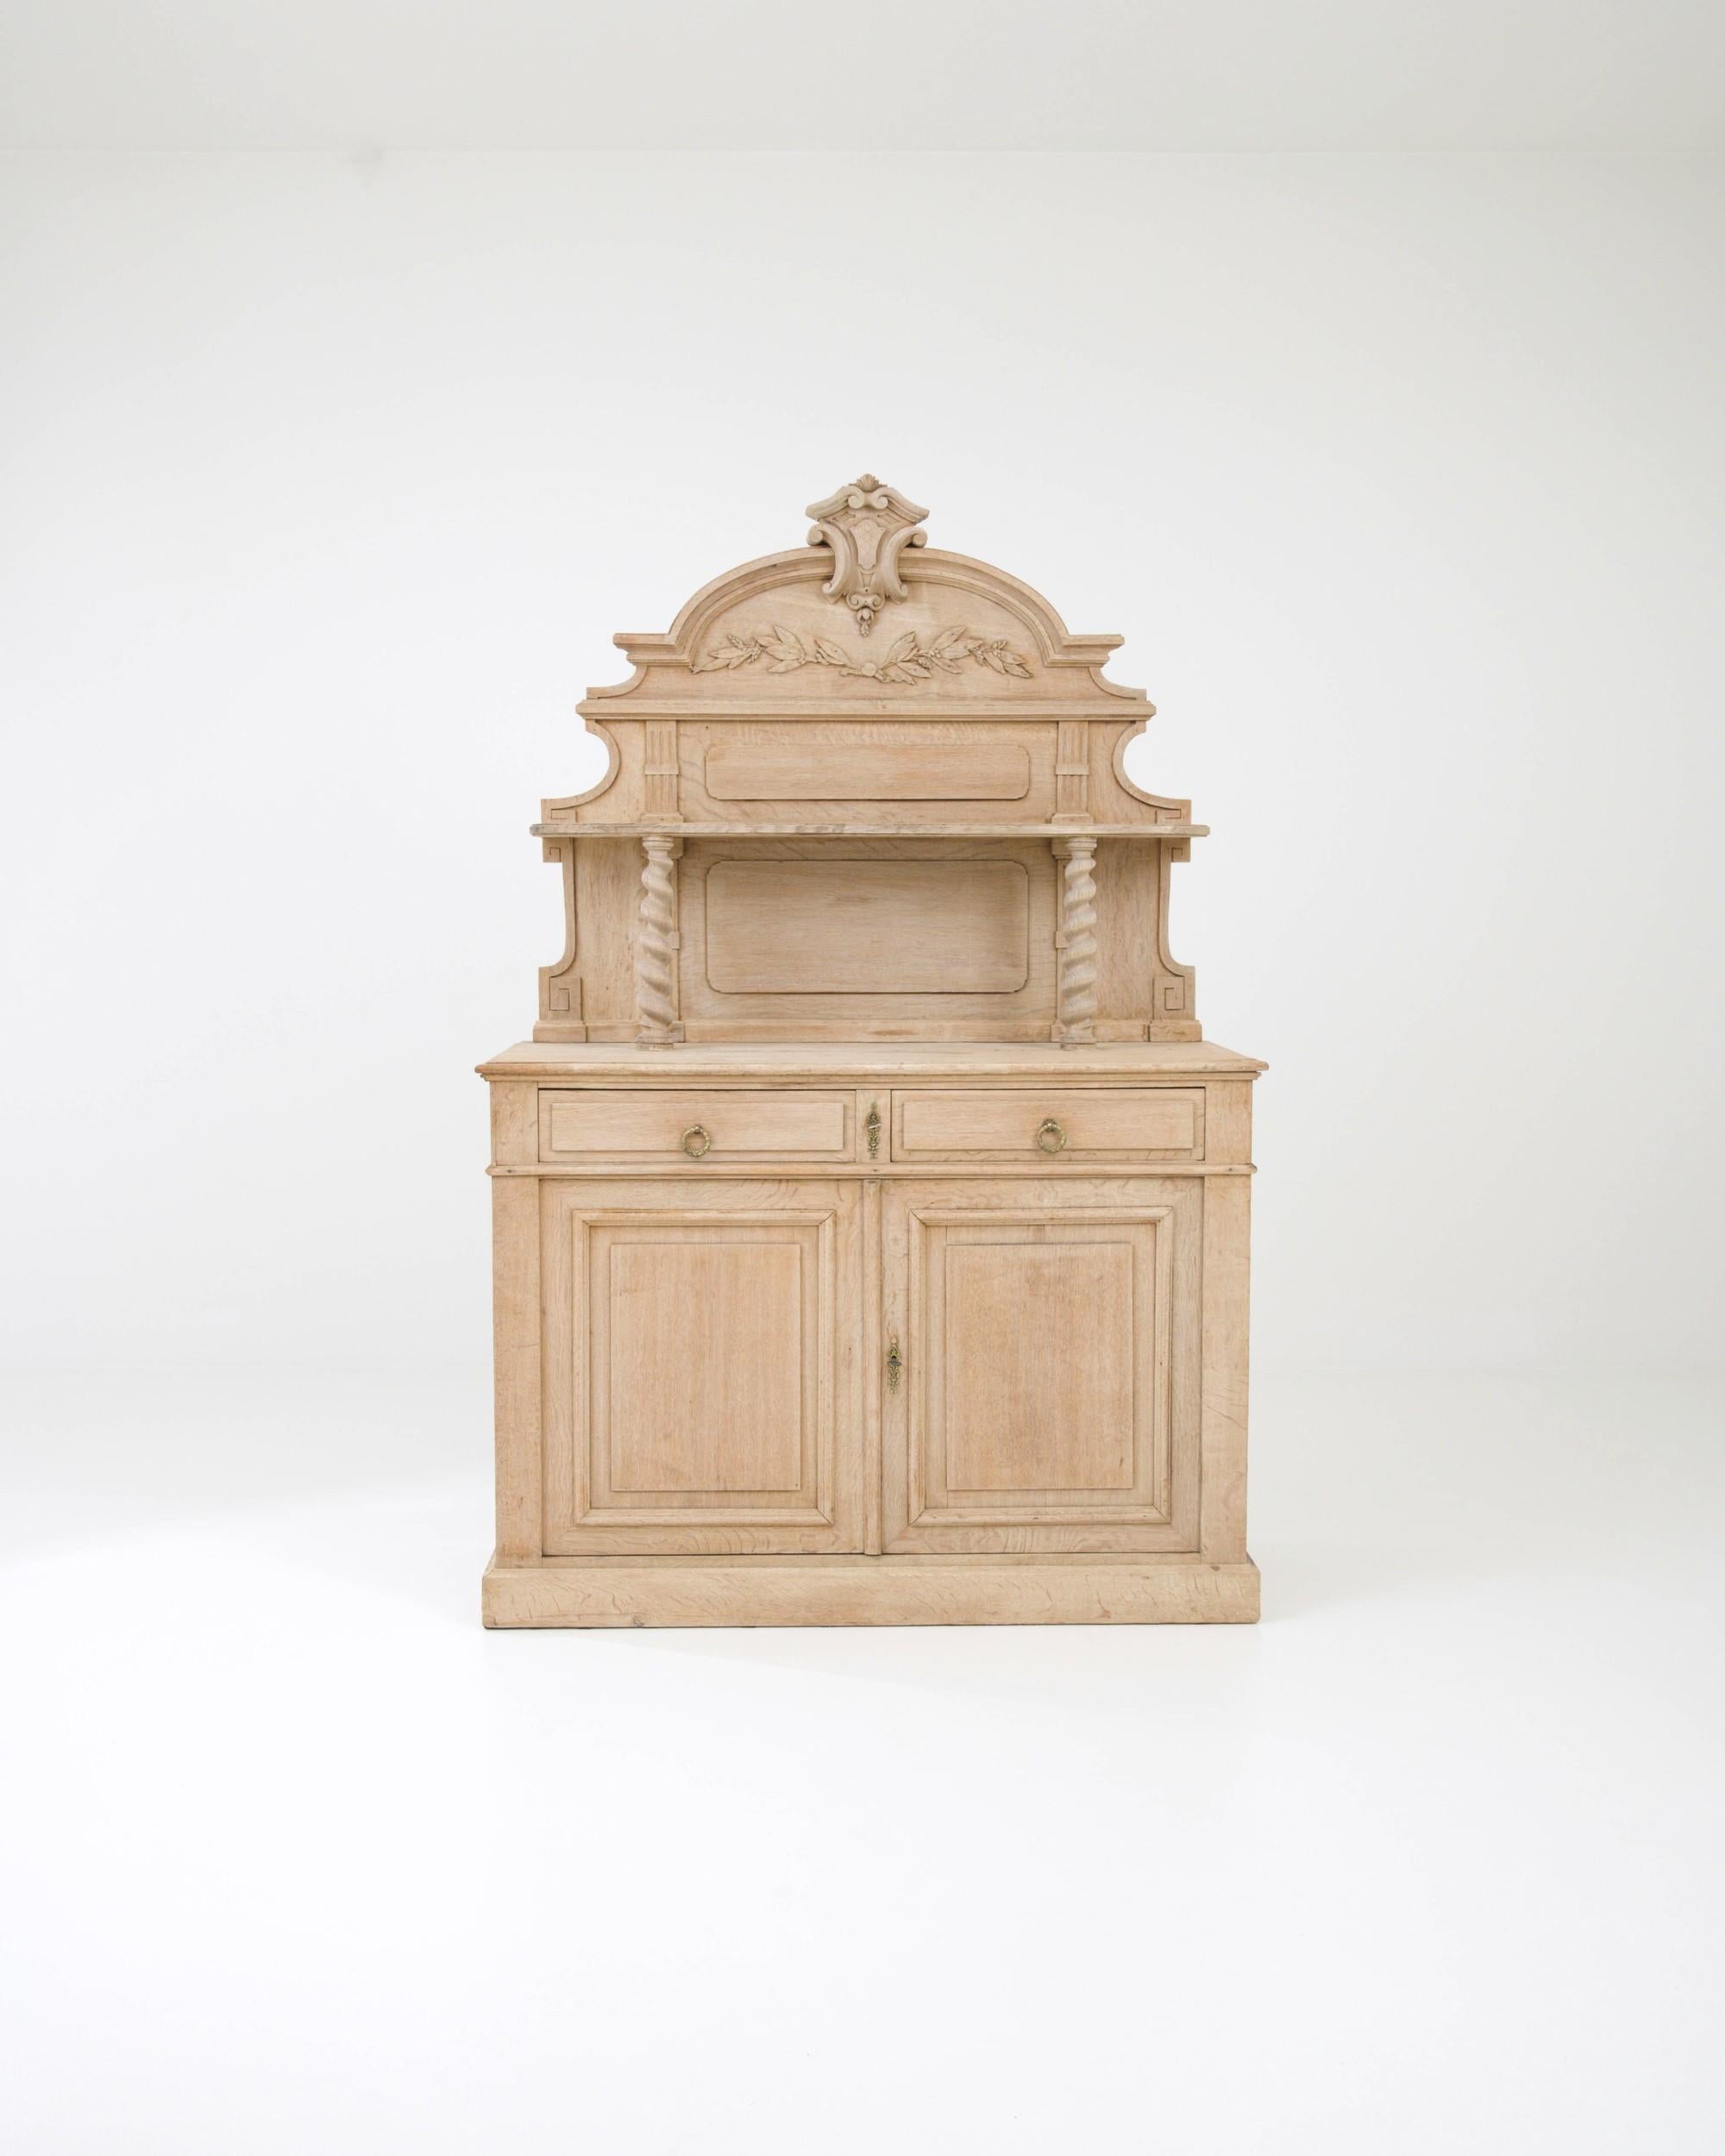 Handcrafted out of solid European oak in the 19th century, this Belgian cupboard offers a distinctive design with elaborate ornamental accents. Twisted columns support the upper display shelf, complemented by meticulous foliate carvings and an